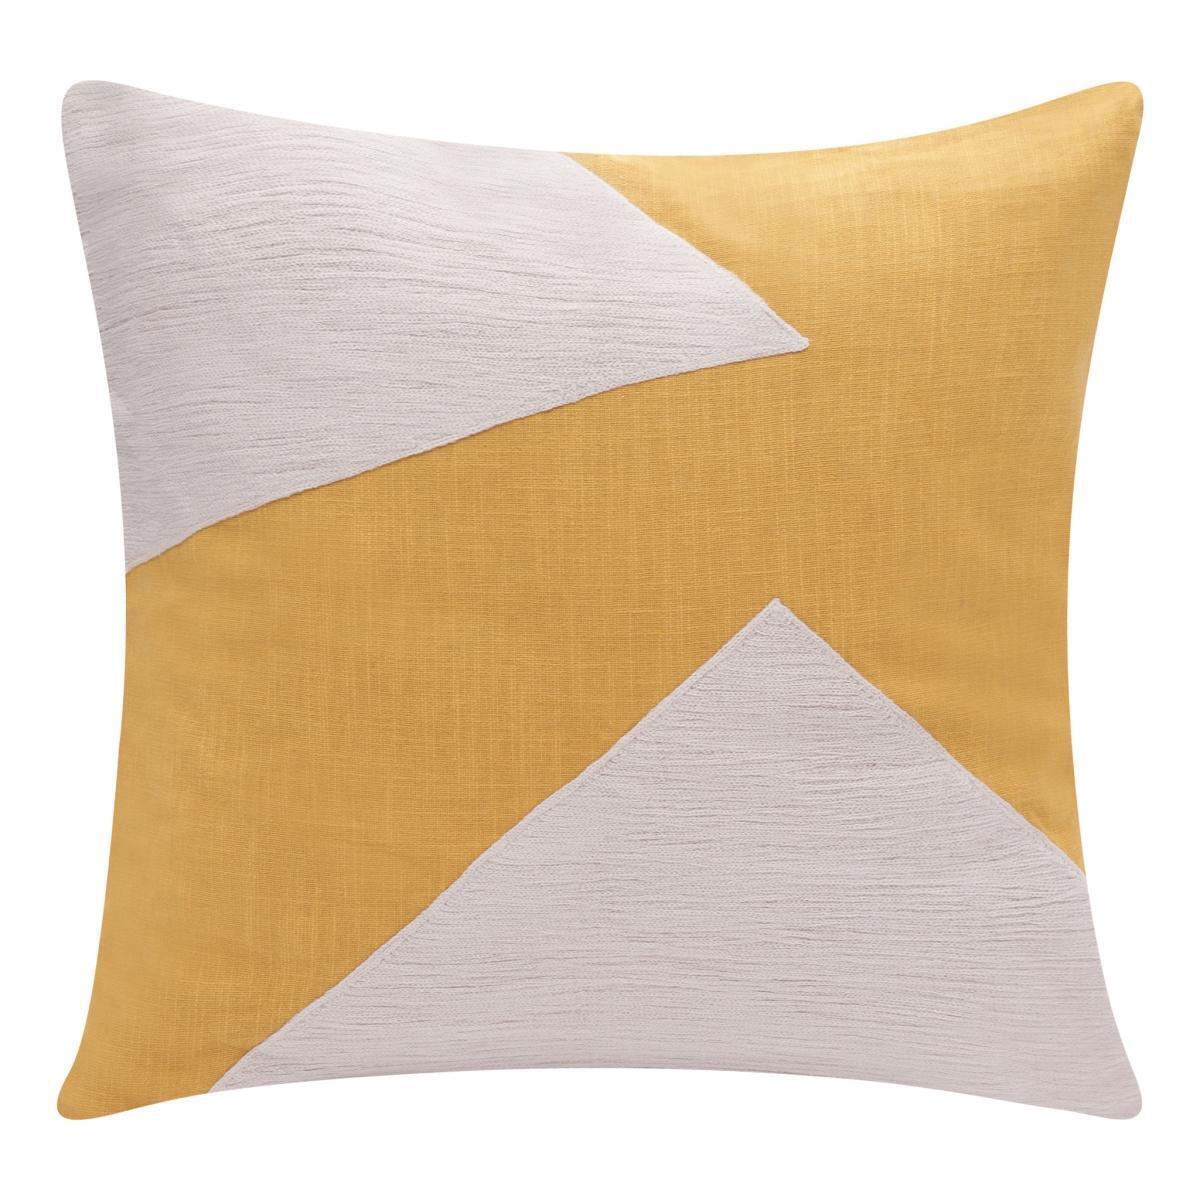 HomeRoots 517037 4 x 20 x 20 in. Yellow Abstract Zippered 100 Percent Cotton Throw Pillow - Set of 2